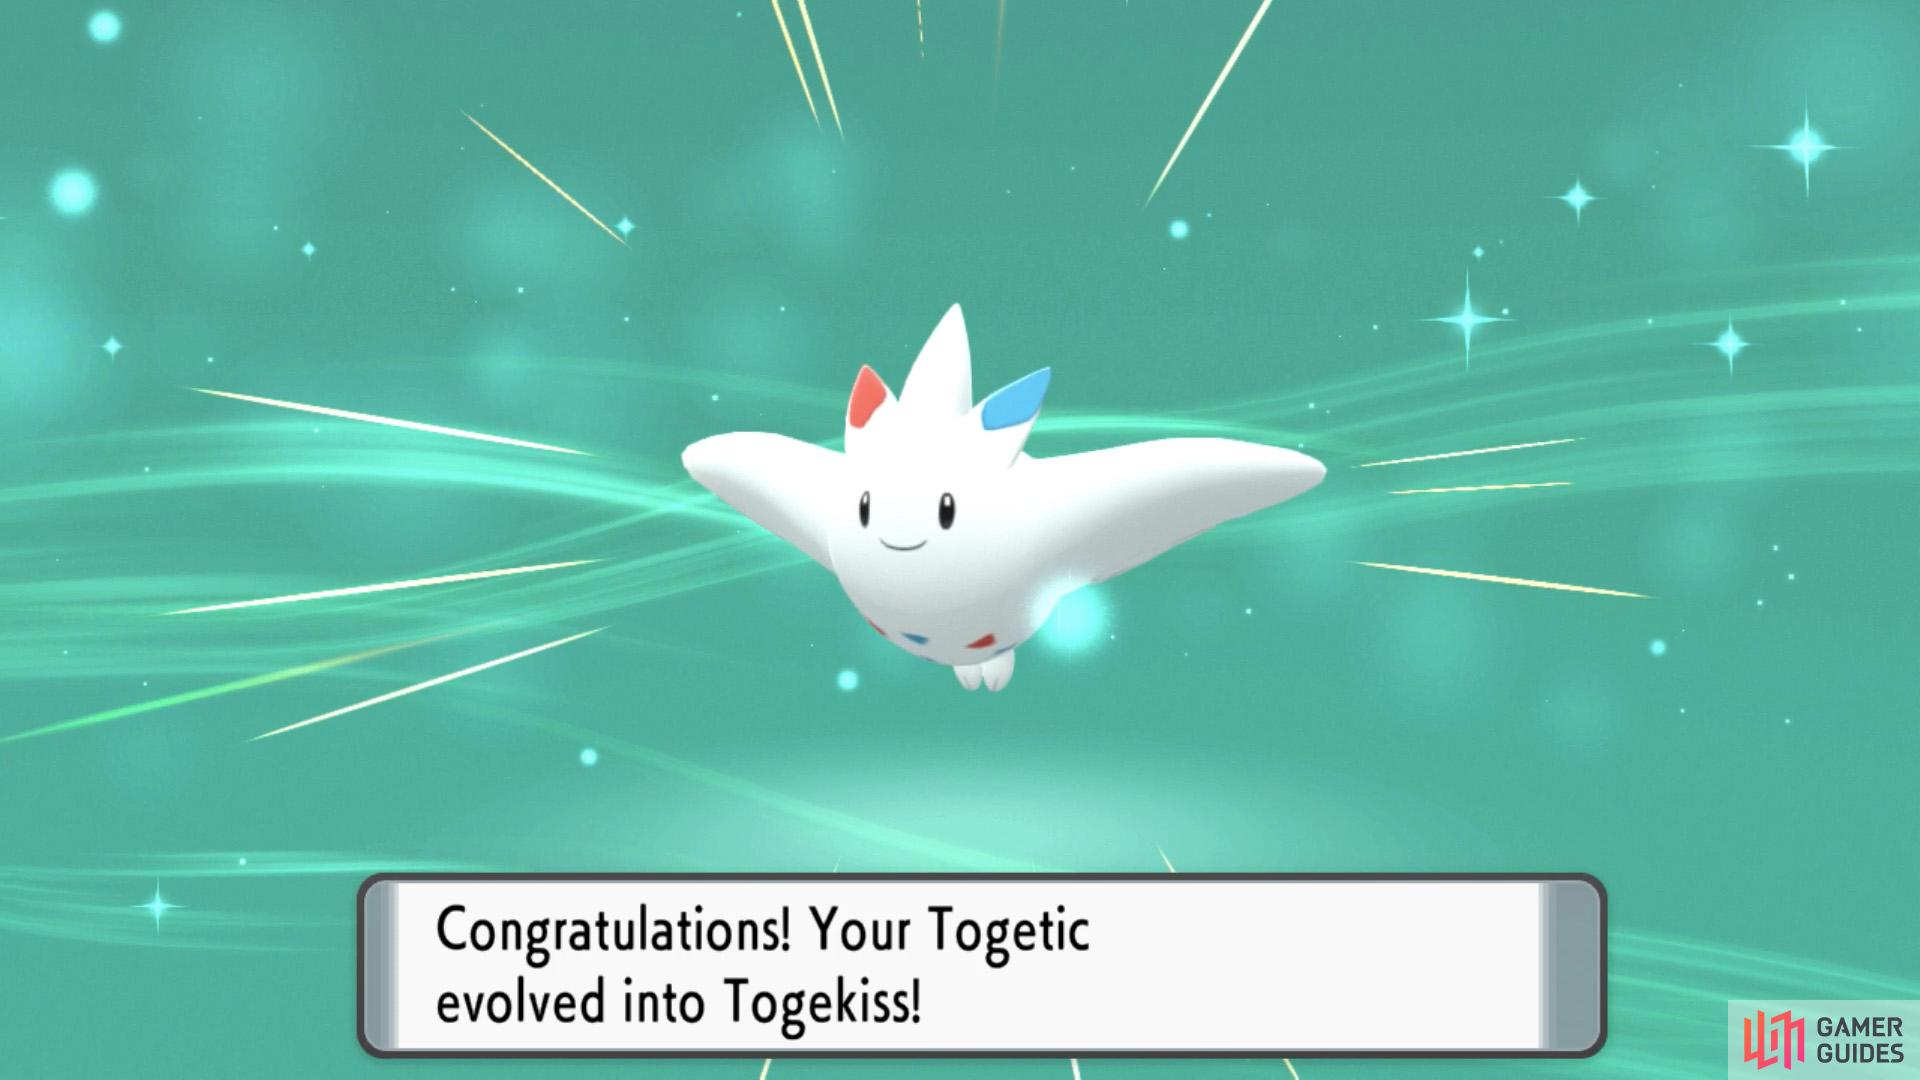 You can use it to evolve the likes of Togetic.